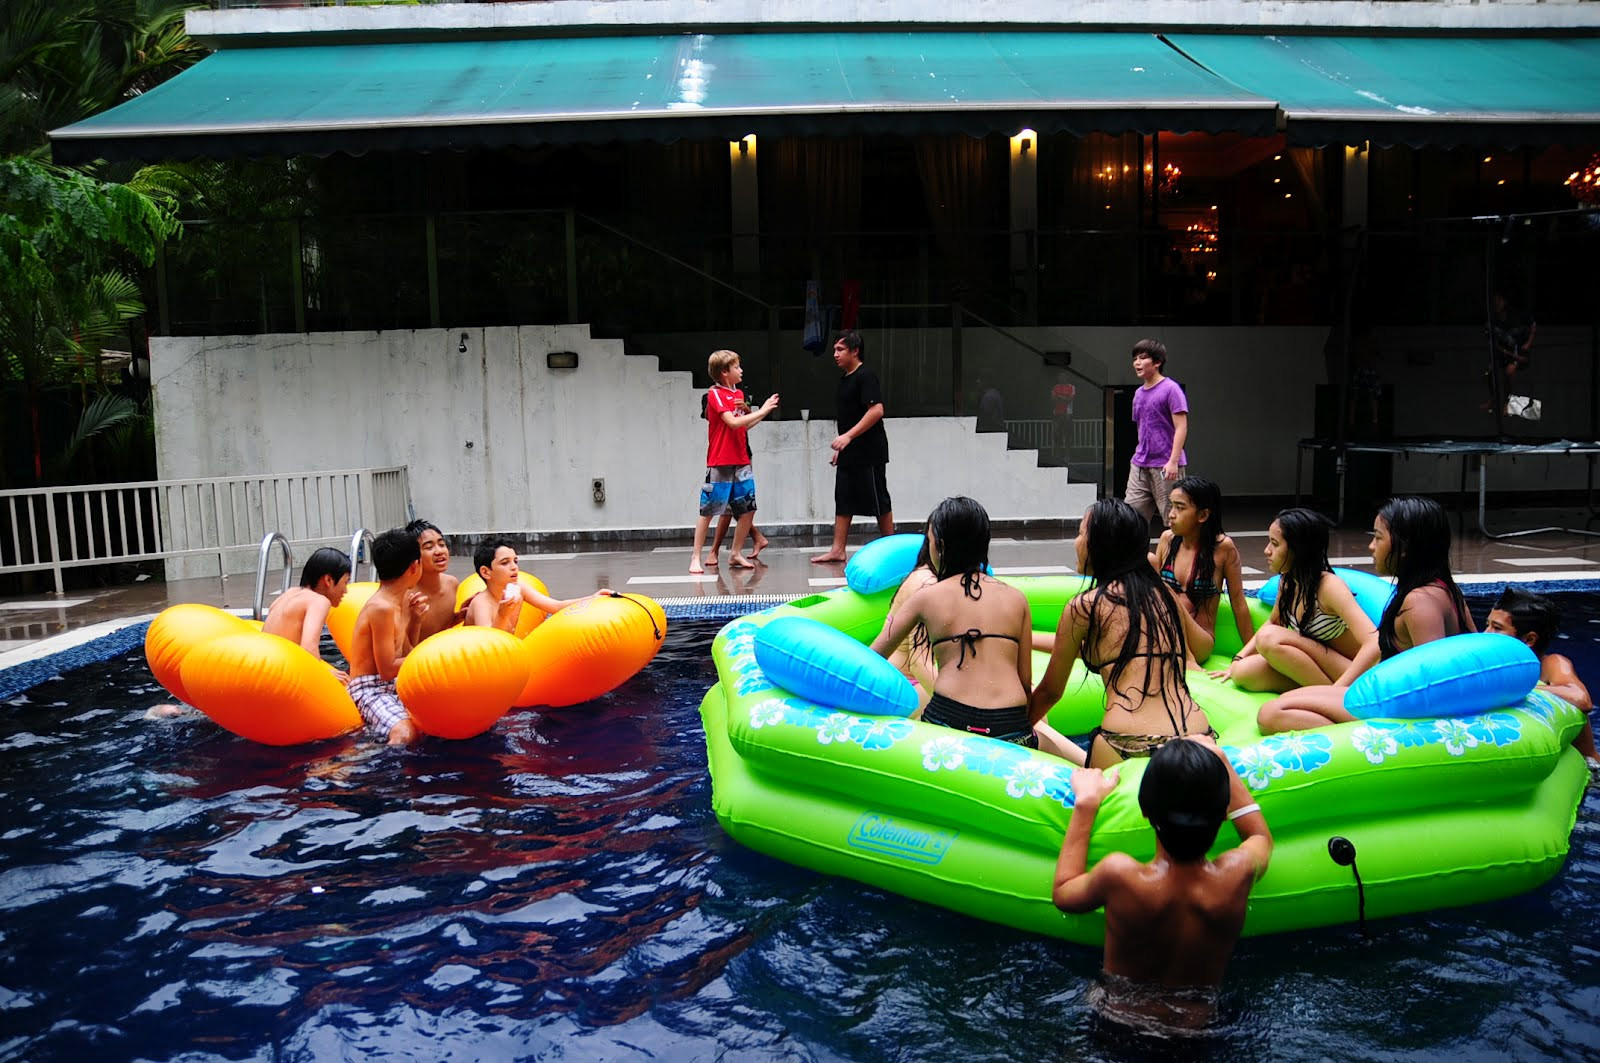 Teen Pool Party